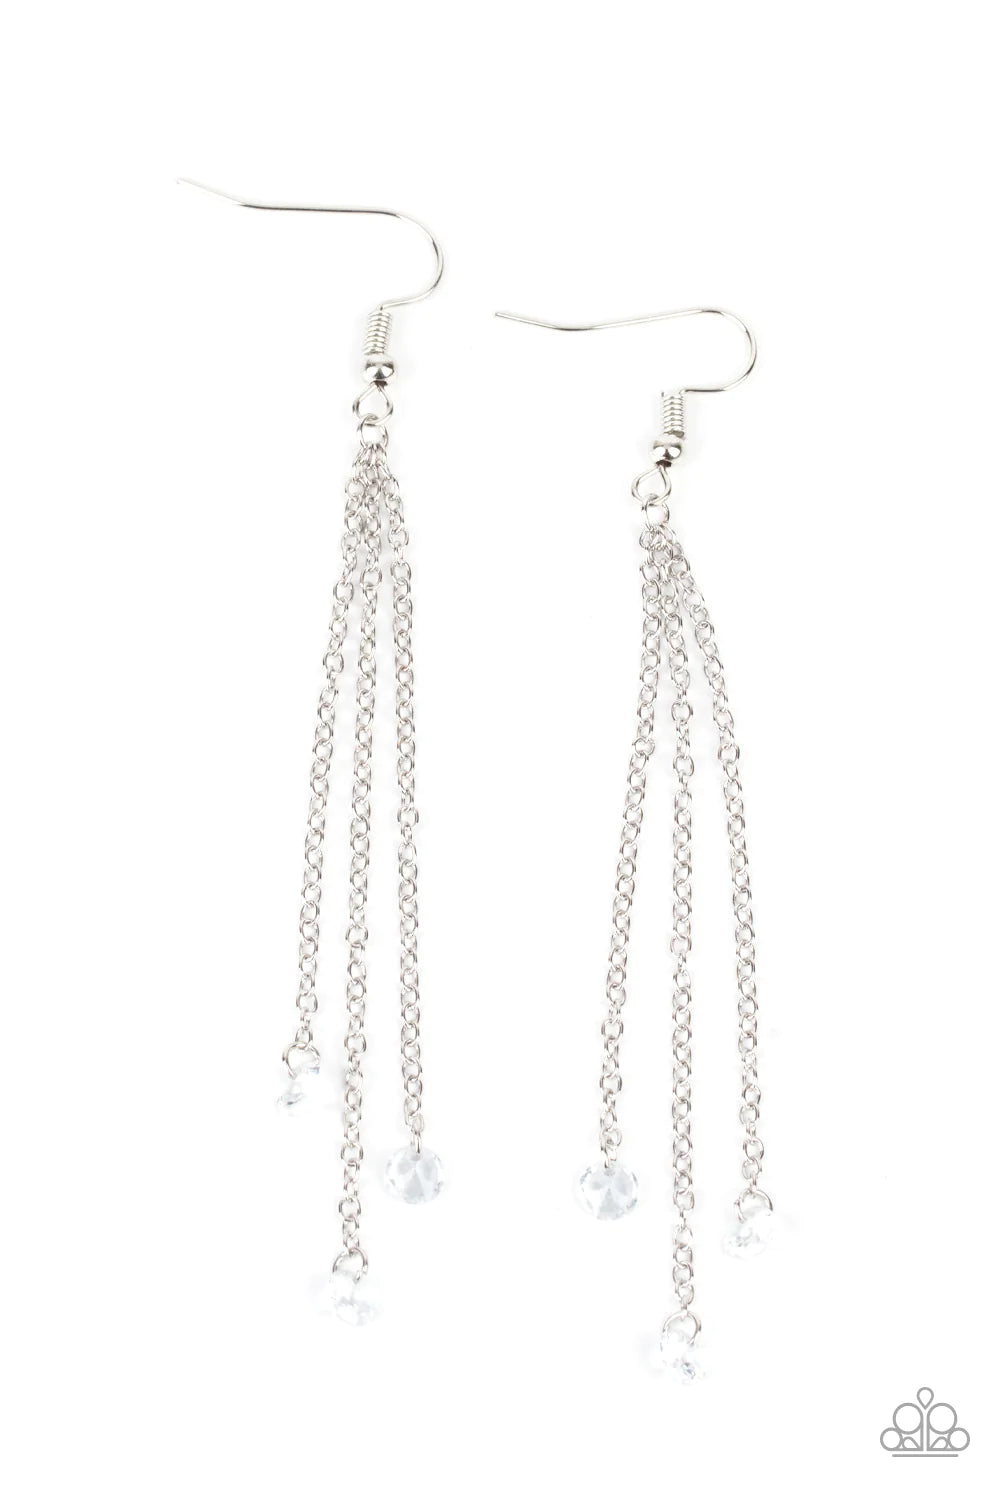 Paparazzi - Divine Droplets - White Earrings